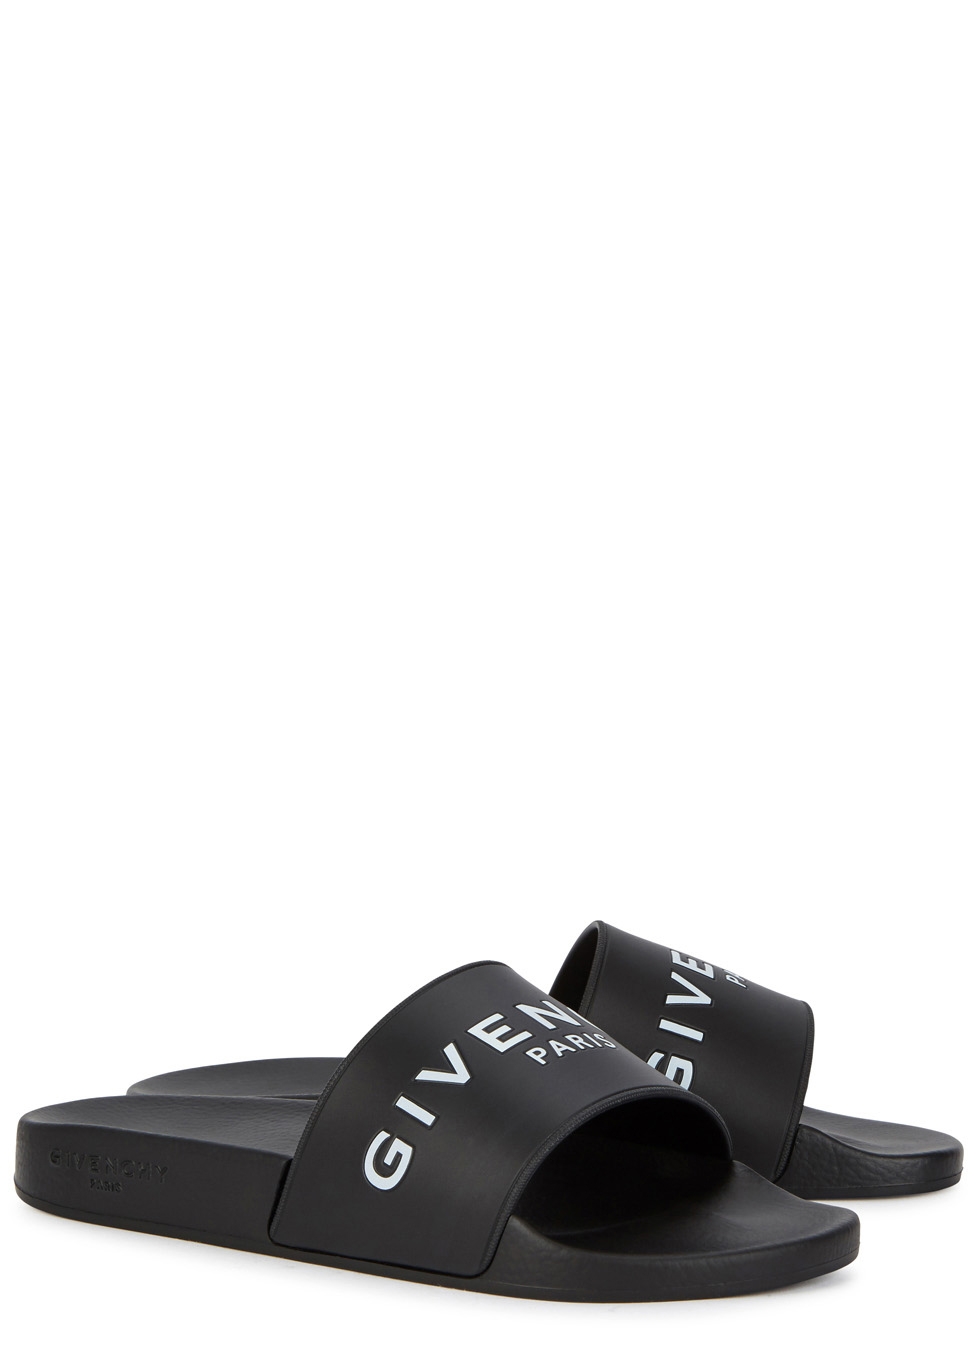 ladies givenchy sliders